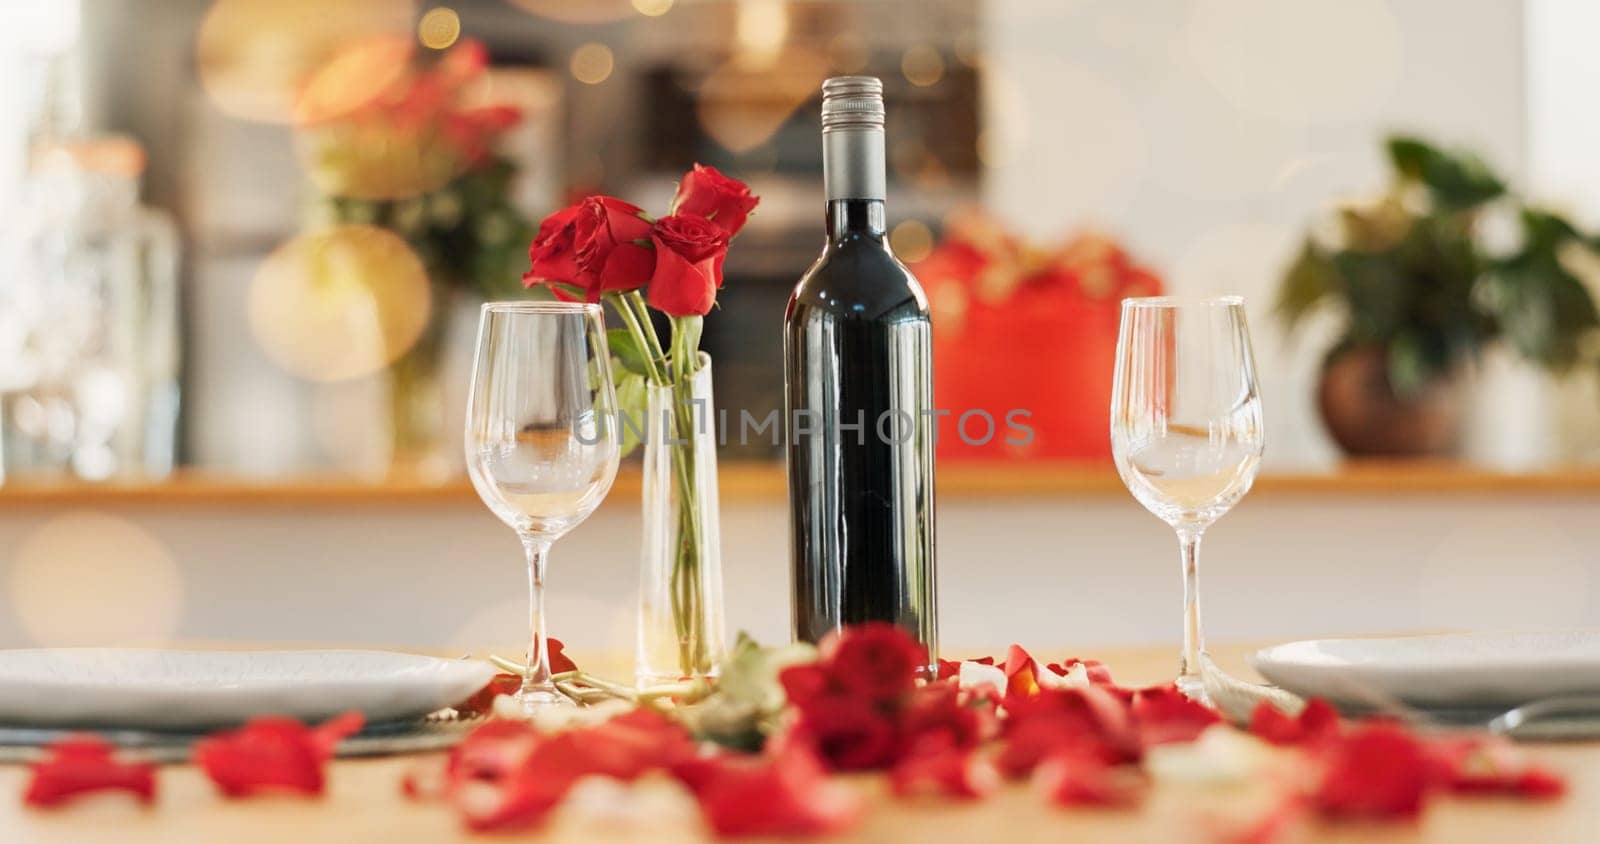 Wine, flowers and romance on valentines day for celebration of love, anniversary or honeymoon in still life. Glass, dinner and elegant date in dining room of home for event, milestone or occasion.